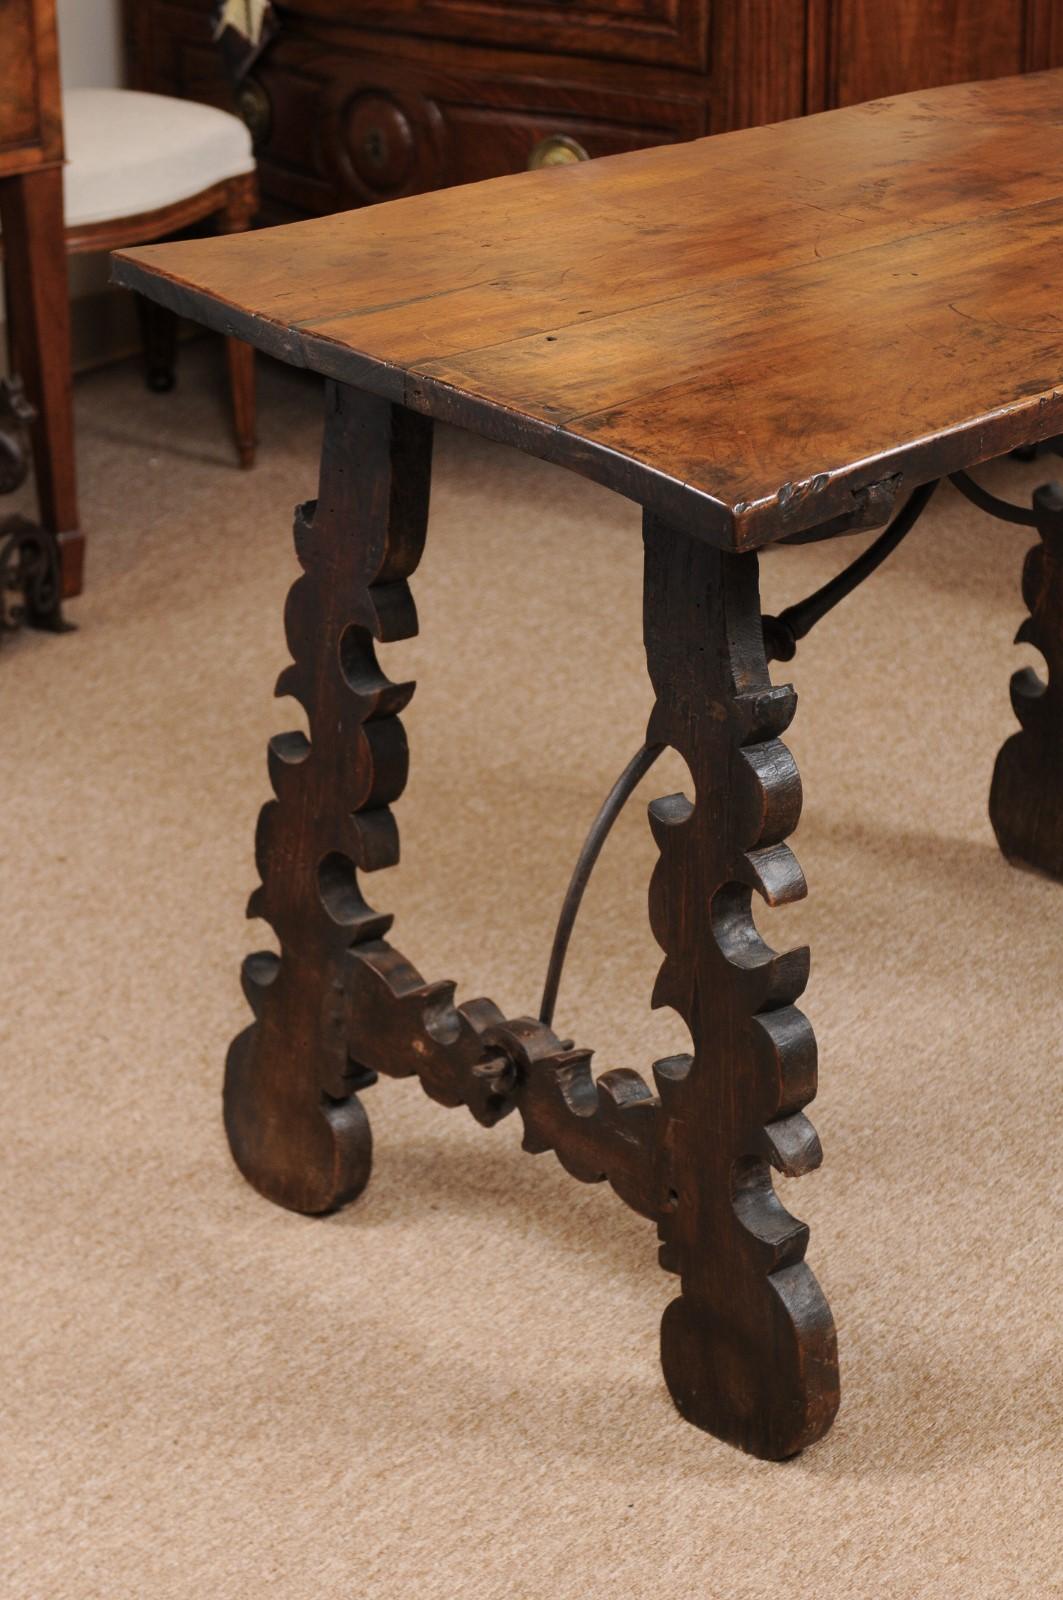 European 18th Century Continental Walnut Table with Lyre-Form Legs & Iron Stretcher For Sale